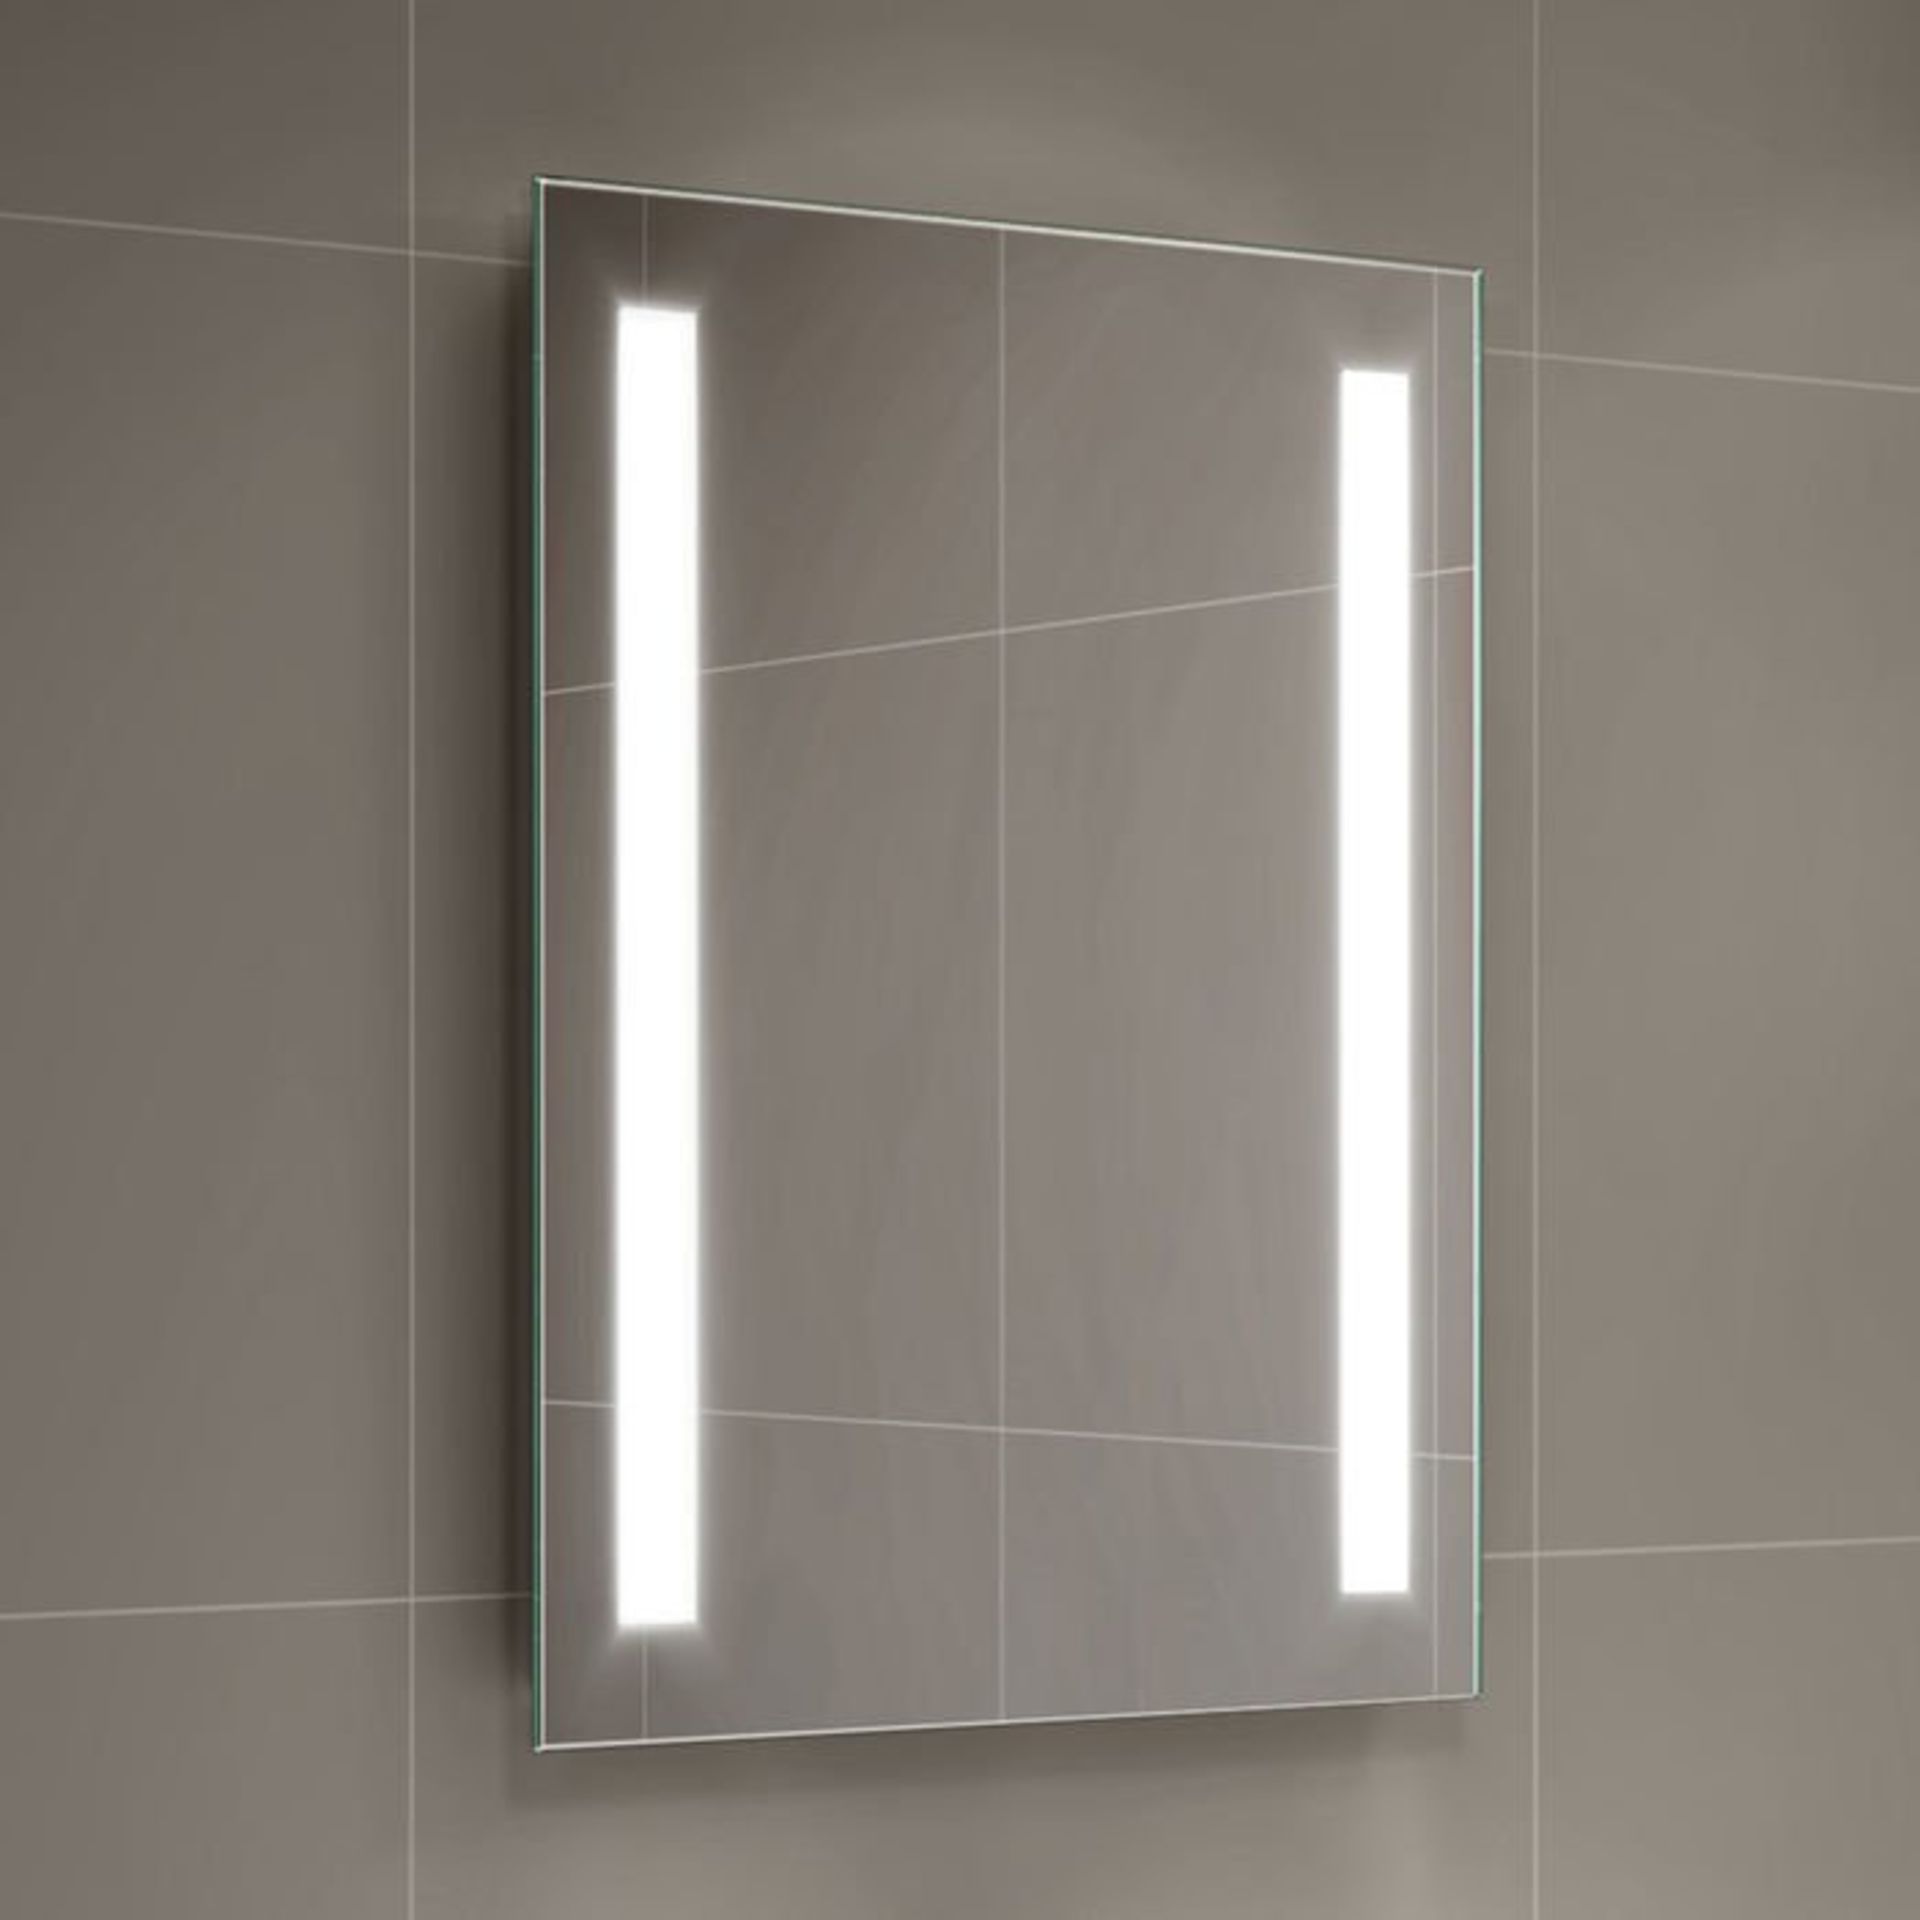 (V29) 500x700mm Omega LED Mirror - Battery Operated. Energy saving controlled On / Off switch